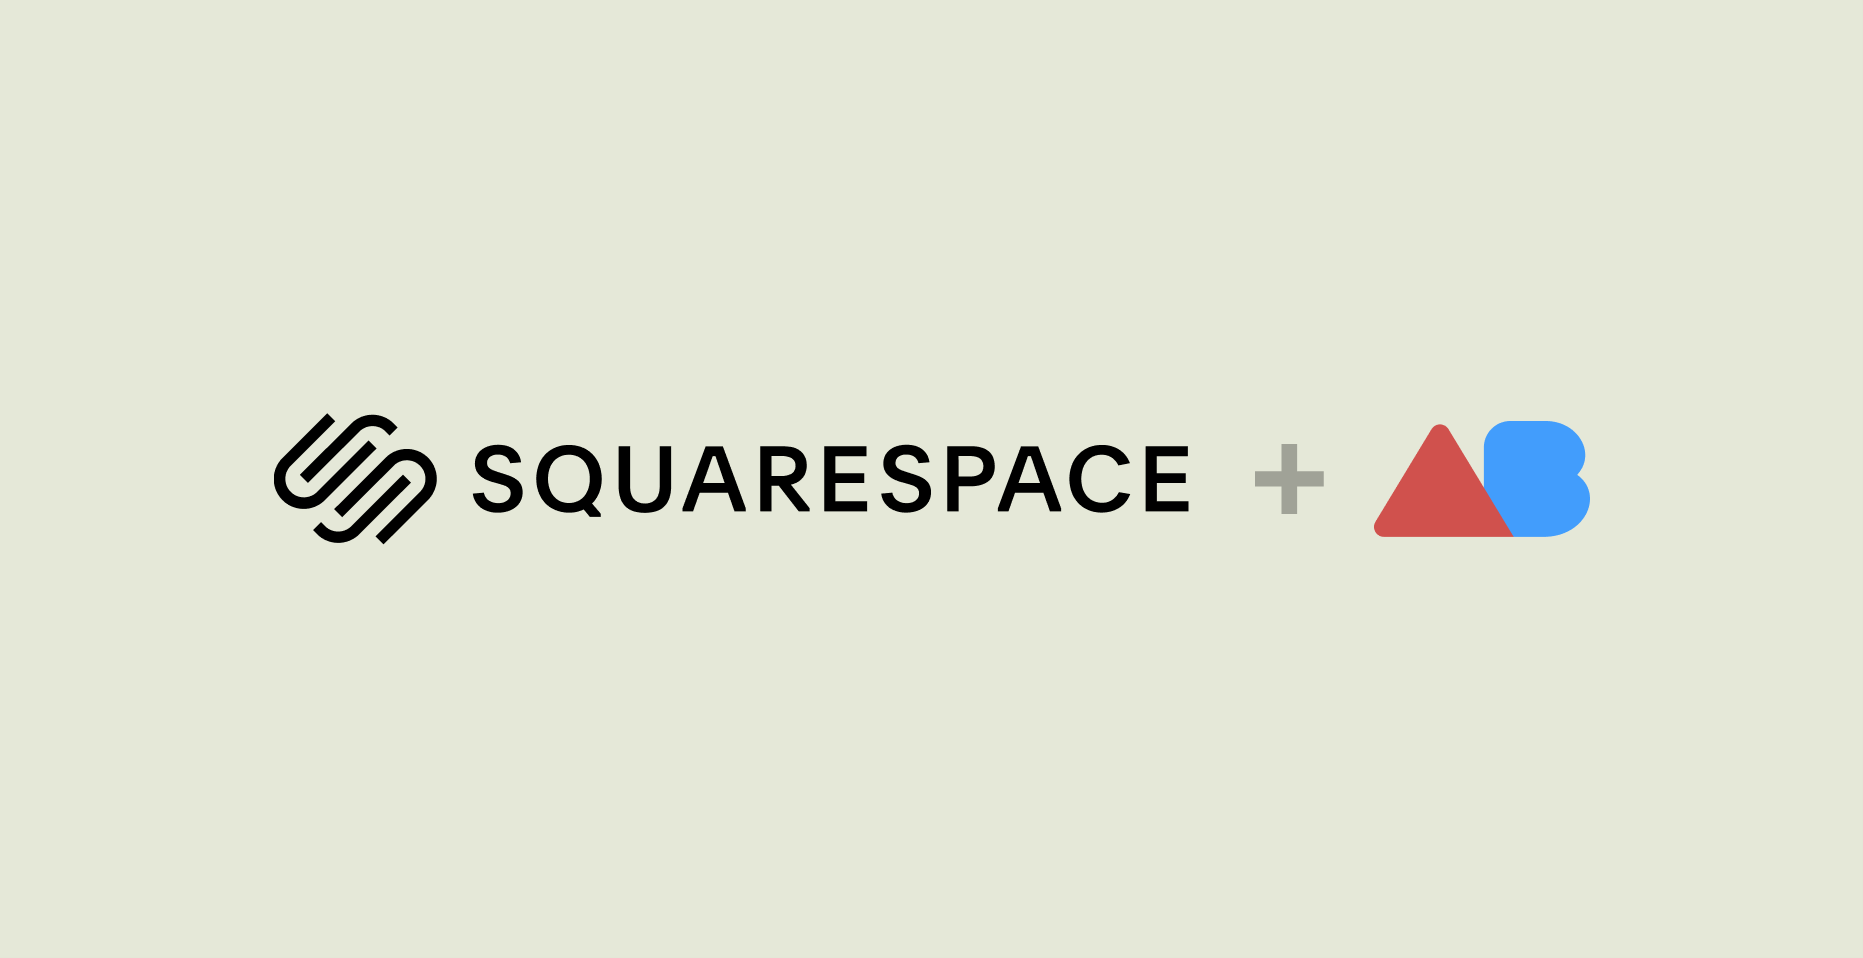 How to do A/B testing on Squarespace